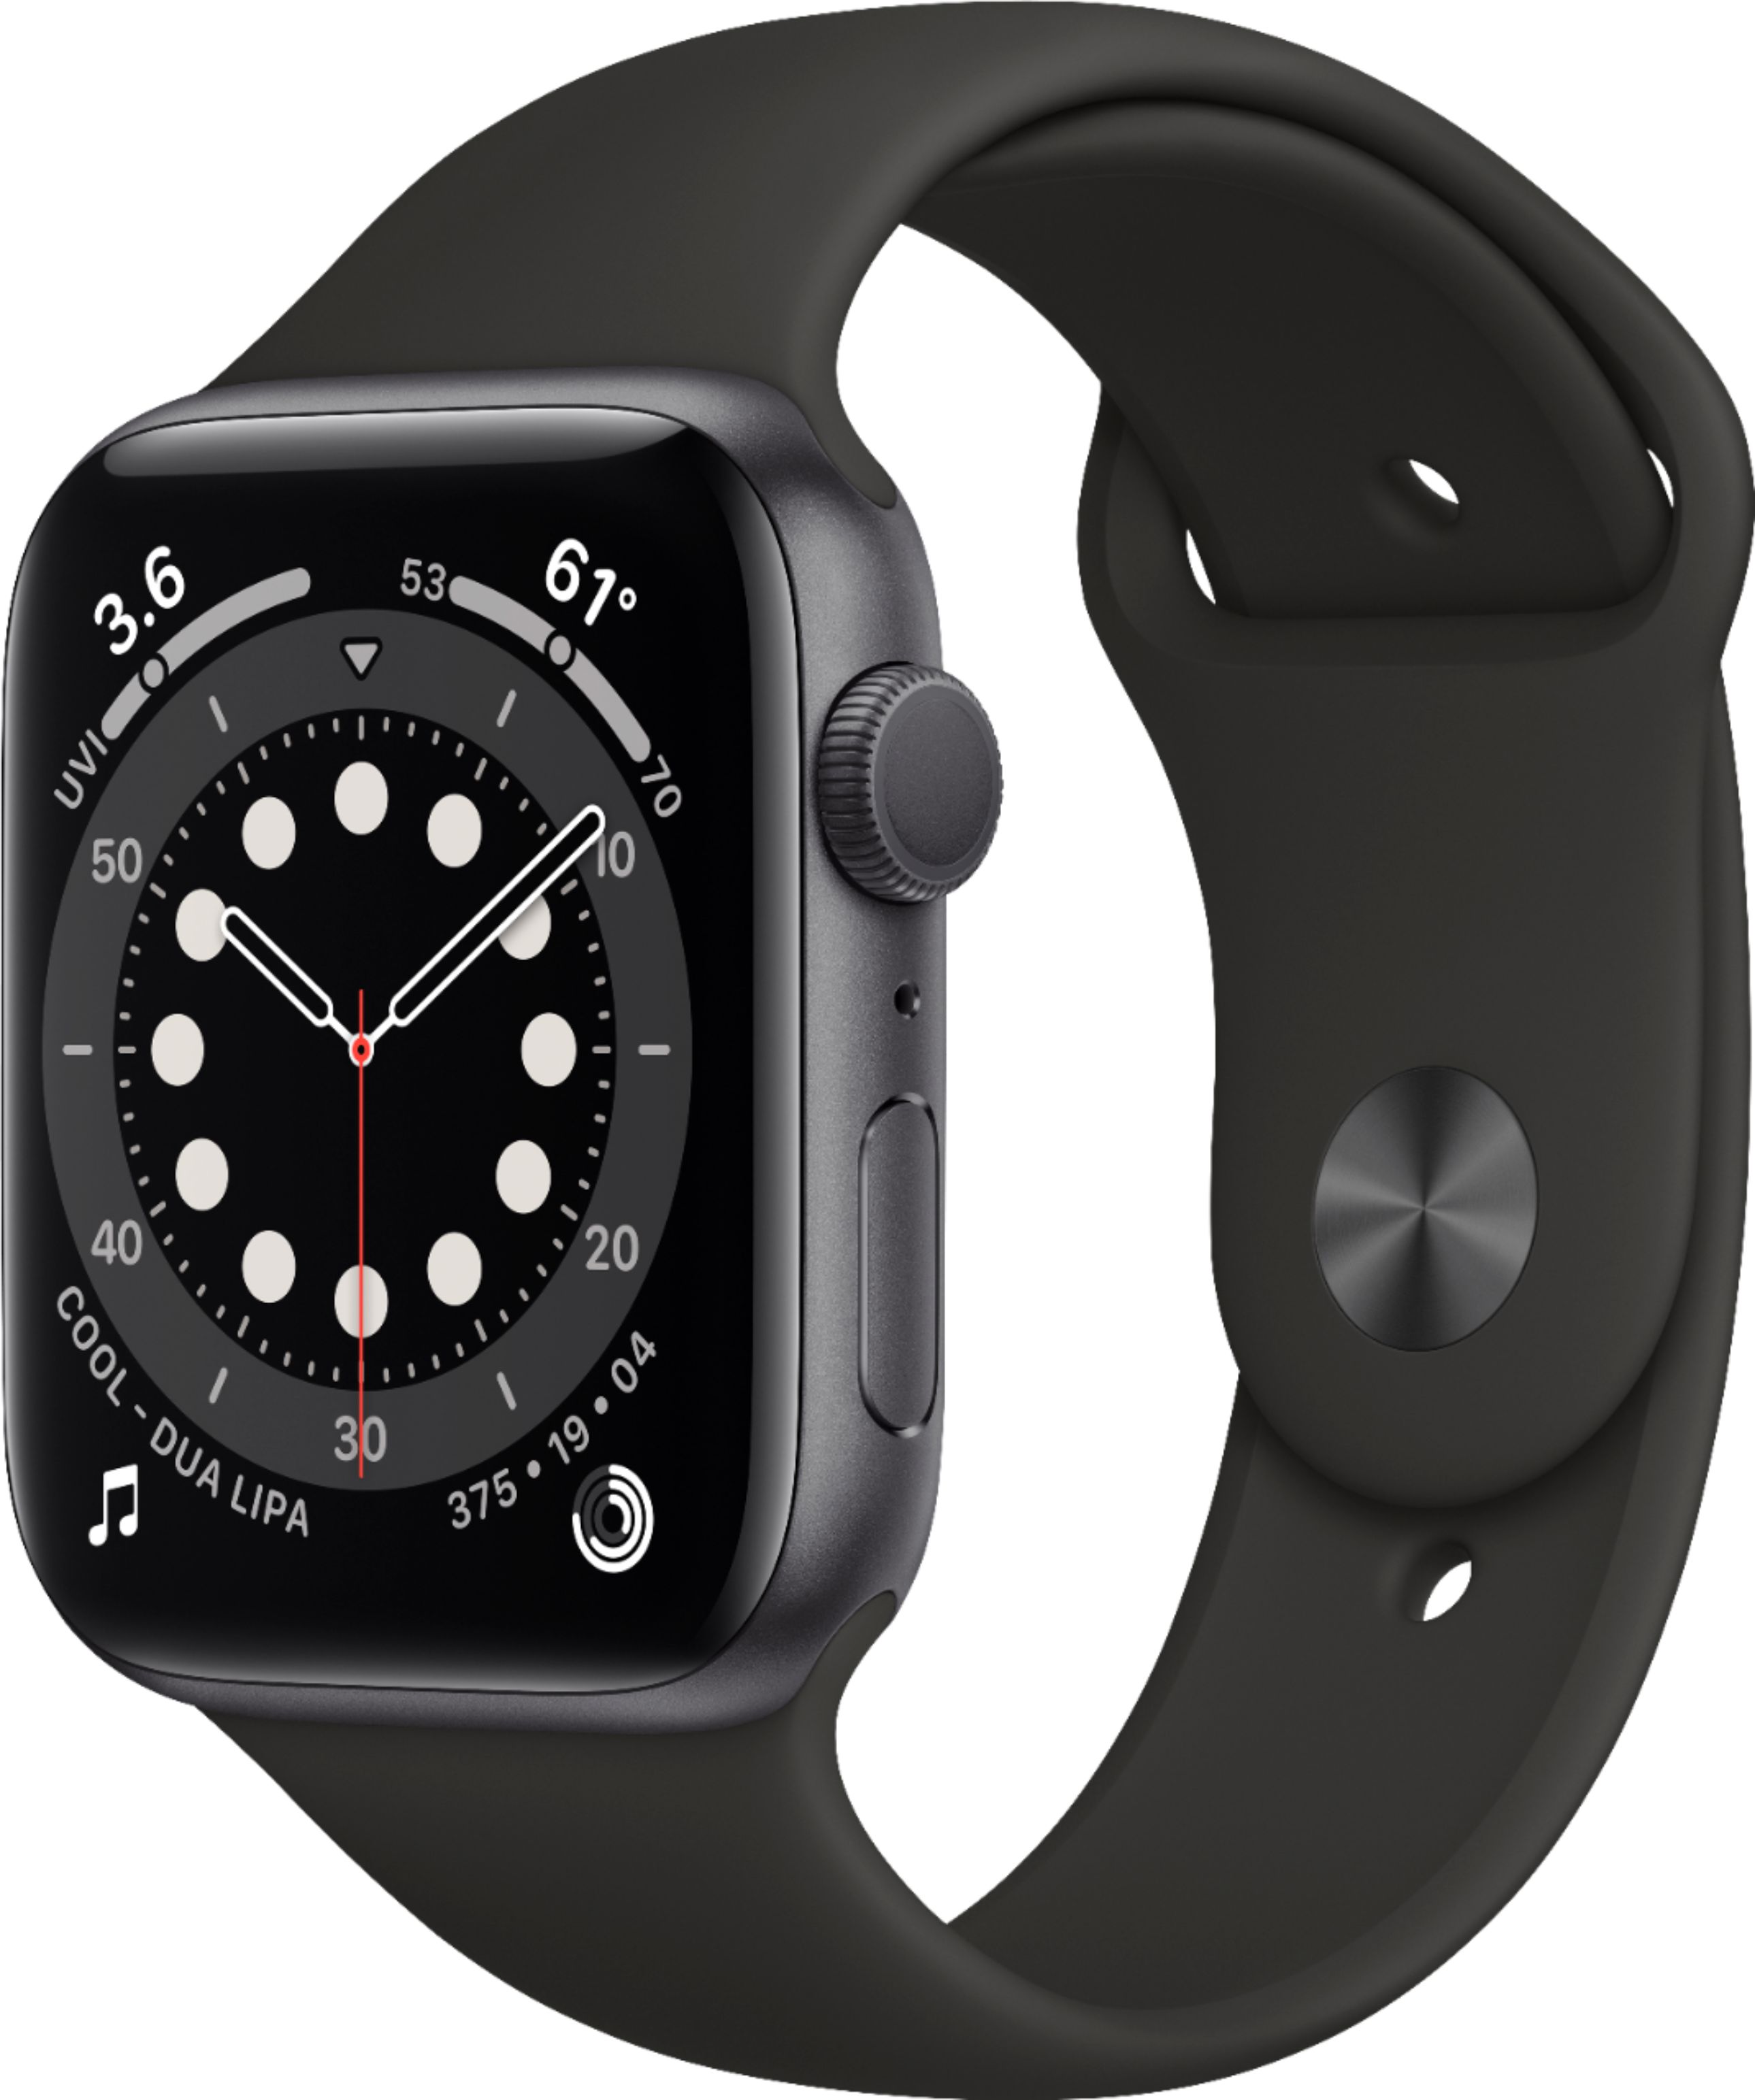 Apple Watch Series 6 (GPS) 44mm Space Gray Aluminum Case with Black Sport Band - Space Gray